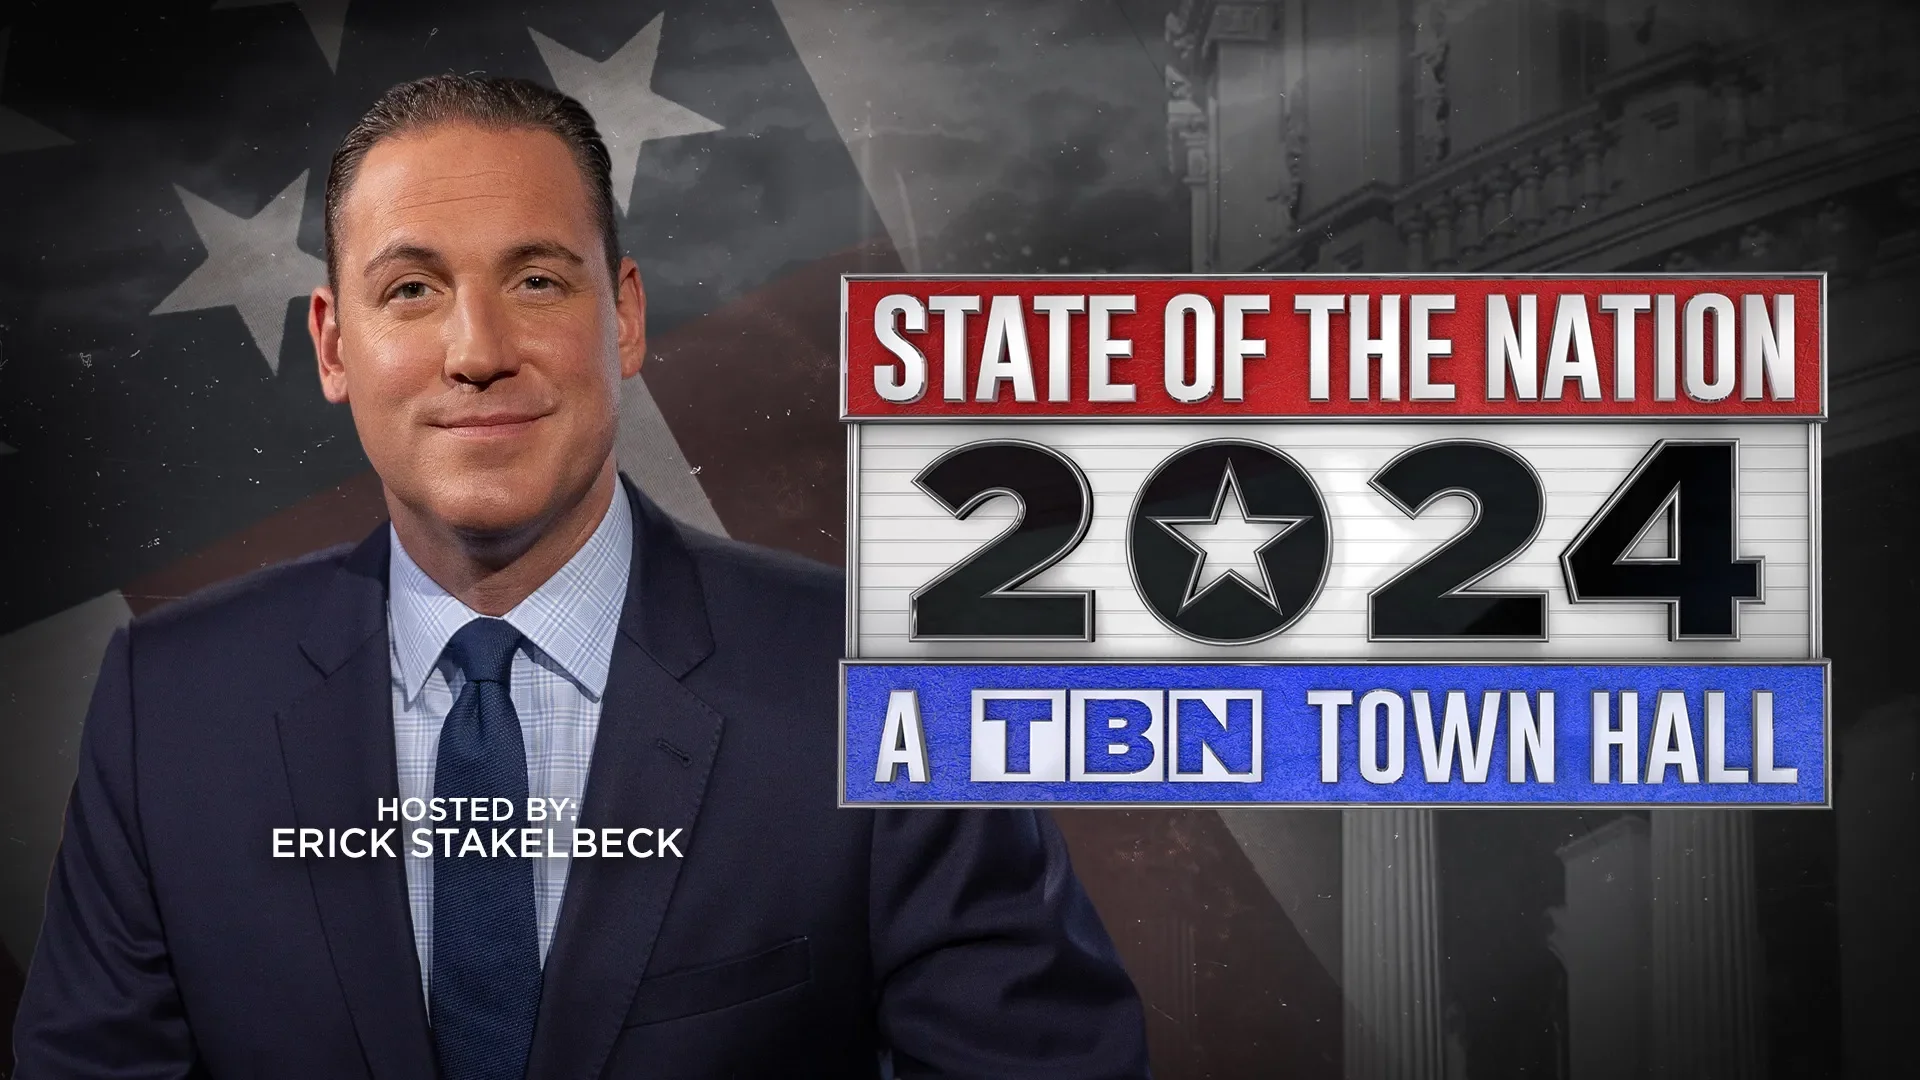 State of the Nation 2024 A TBN Townhall